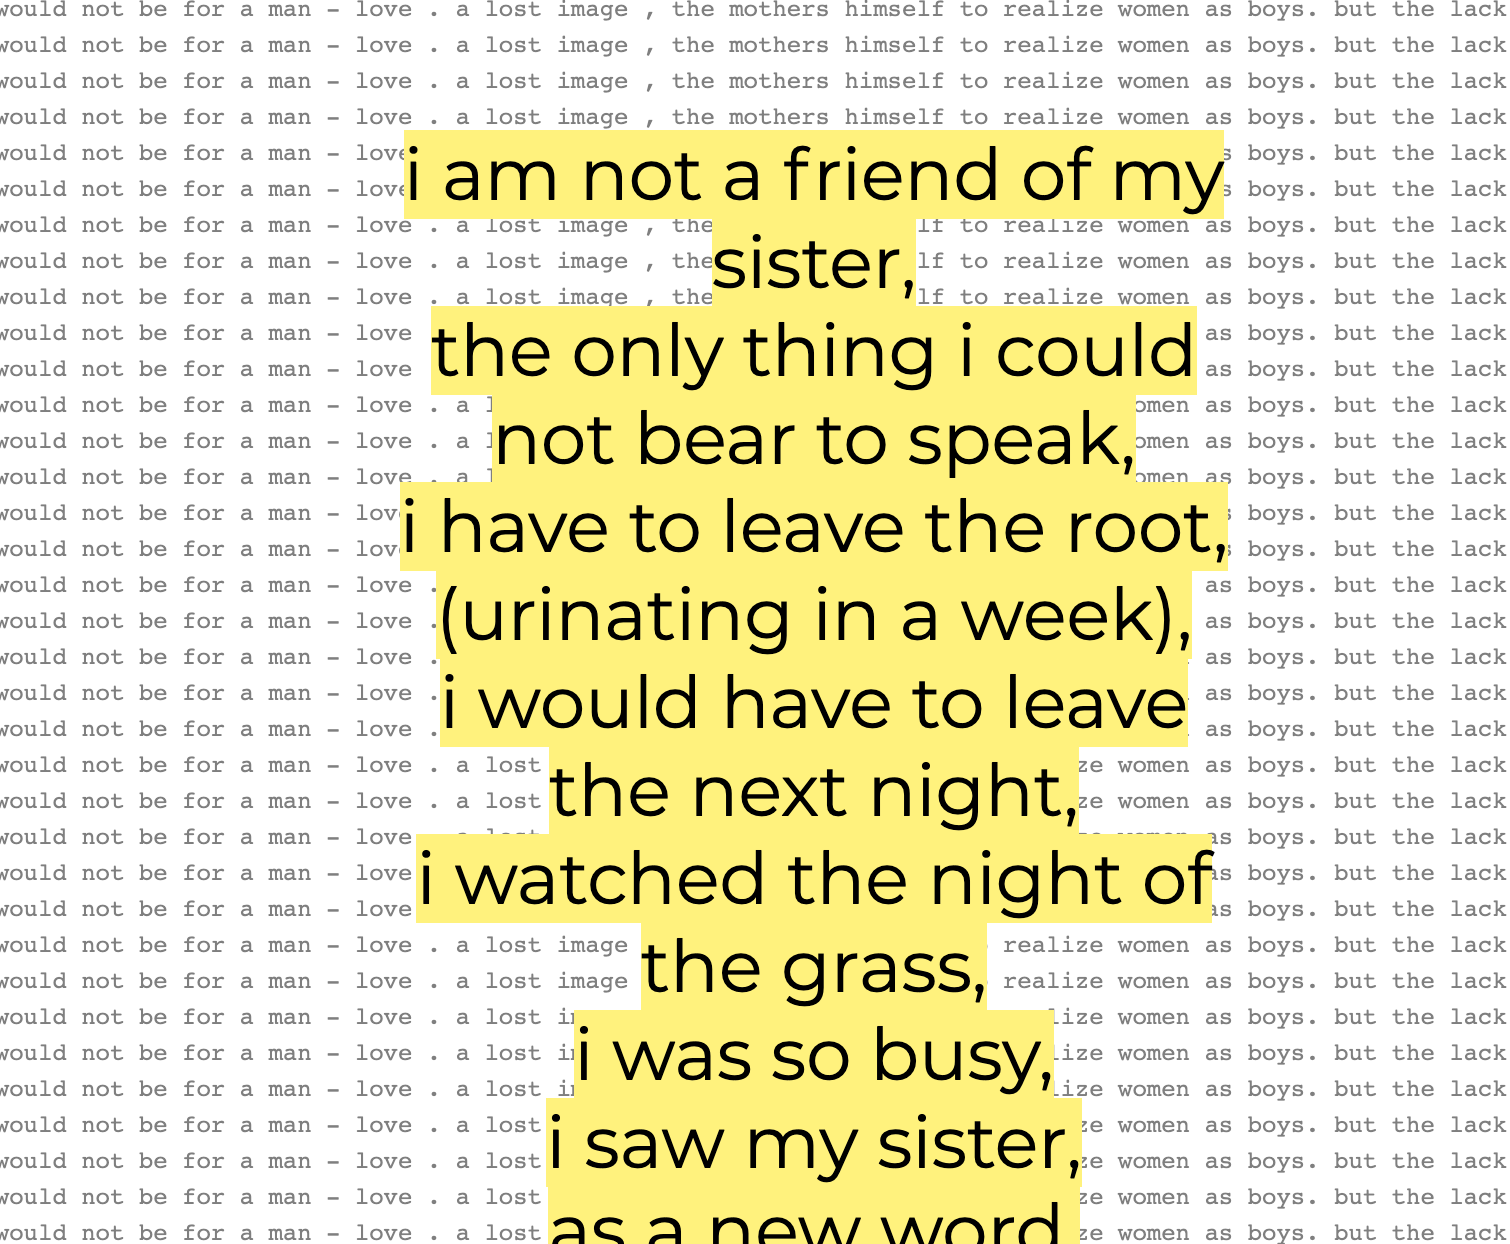 On a white background, the text 'but for a man -love . a lost image , the mothers himself to realize women as boys, but.' repeat. In the foreground, black text with a yellow background reads 'i am not a friend of my sister, the only thing i could not bear to speak, i have to leave the root (urinating in a week), i would have to leave in the next night, i watched the night of the grass, i was so busy, i saw my sister, as a new word'.